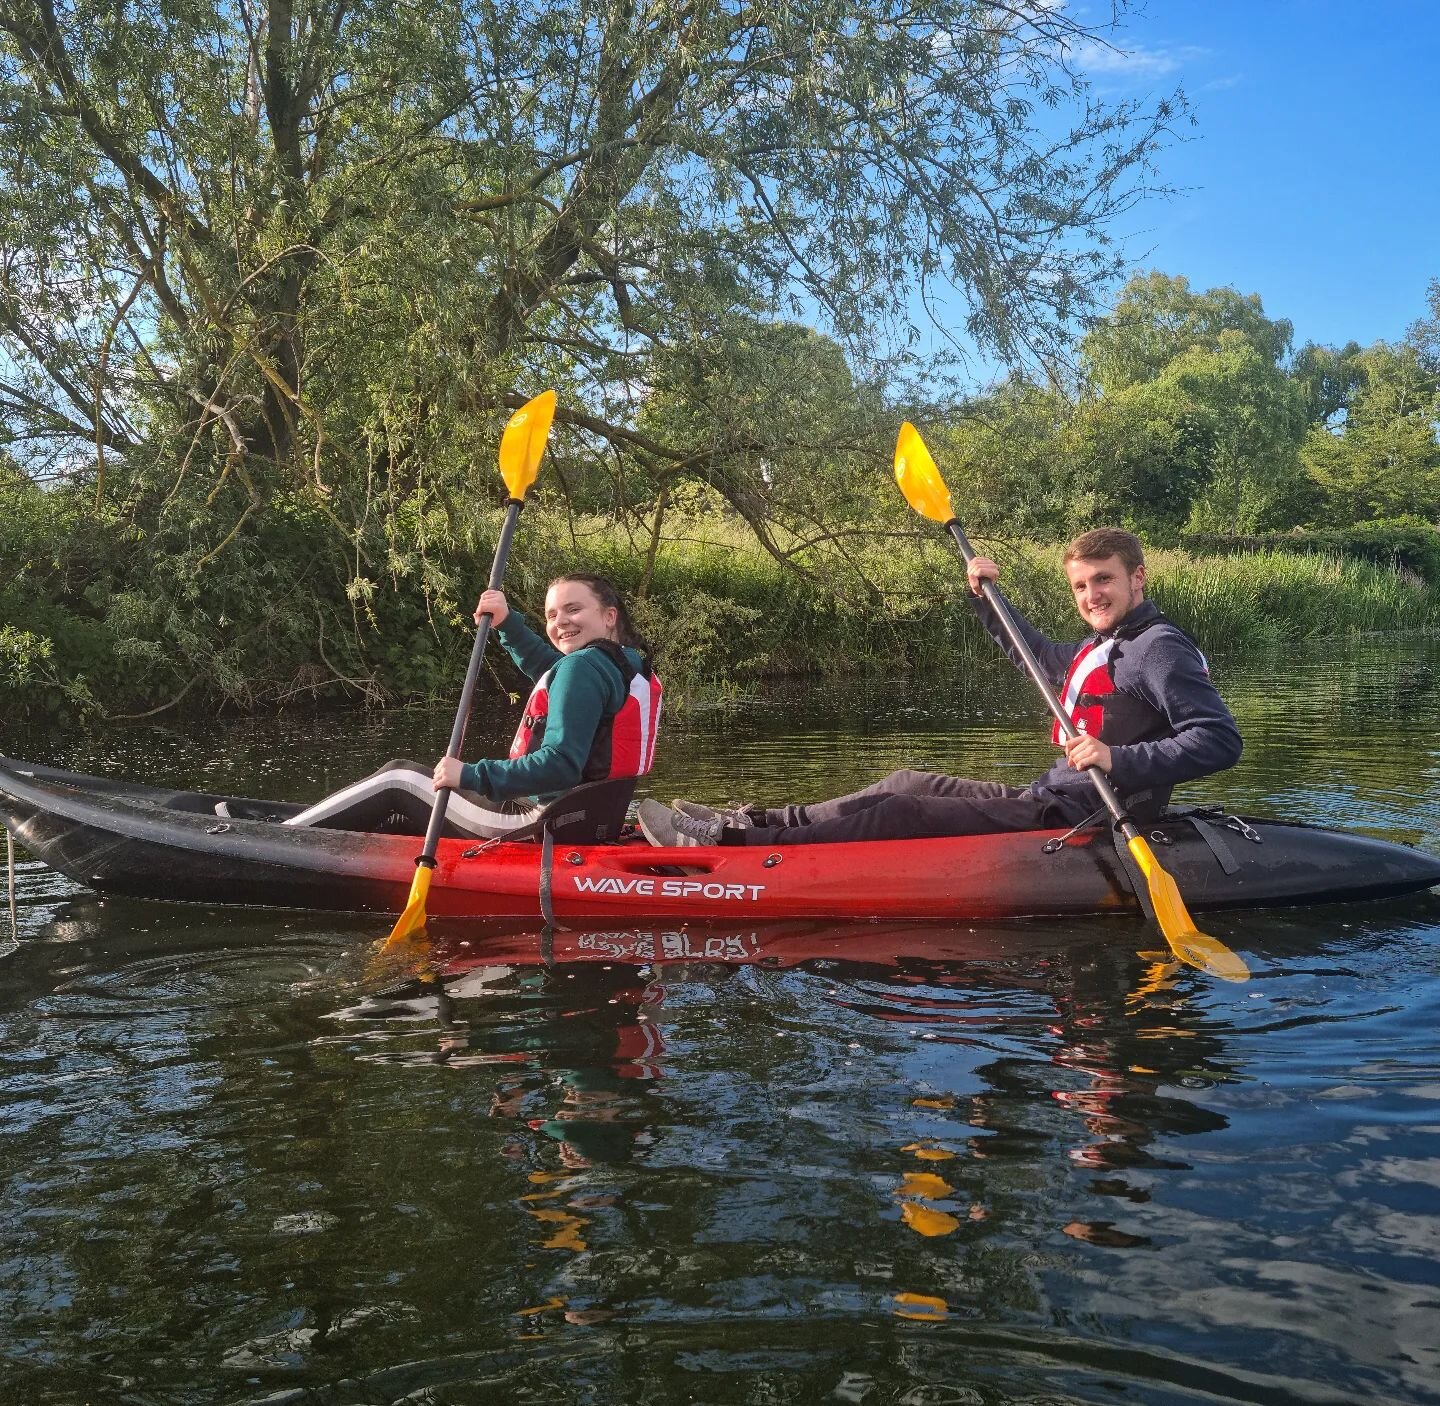 Our tandem kayaks are exceptionally stable and glide through the water! 🛶

Come try one out this weekend. Book by following link in bio! 

#sudburysuffolk 
#essex 
#suffolk 
#riverstour 
#eastanglia 
#kayaking 
#familyfun